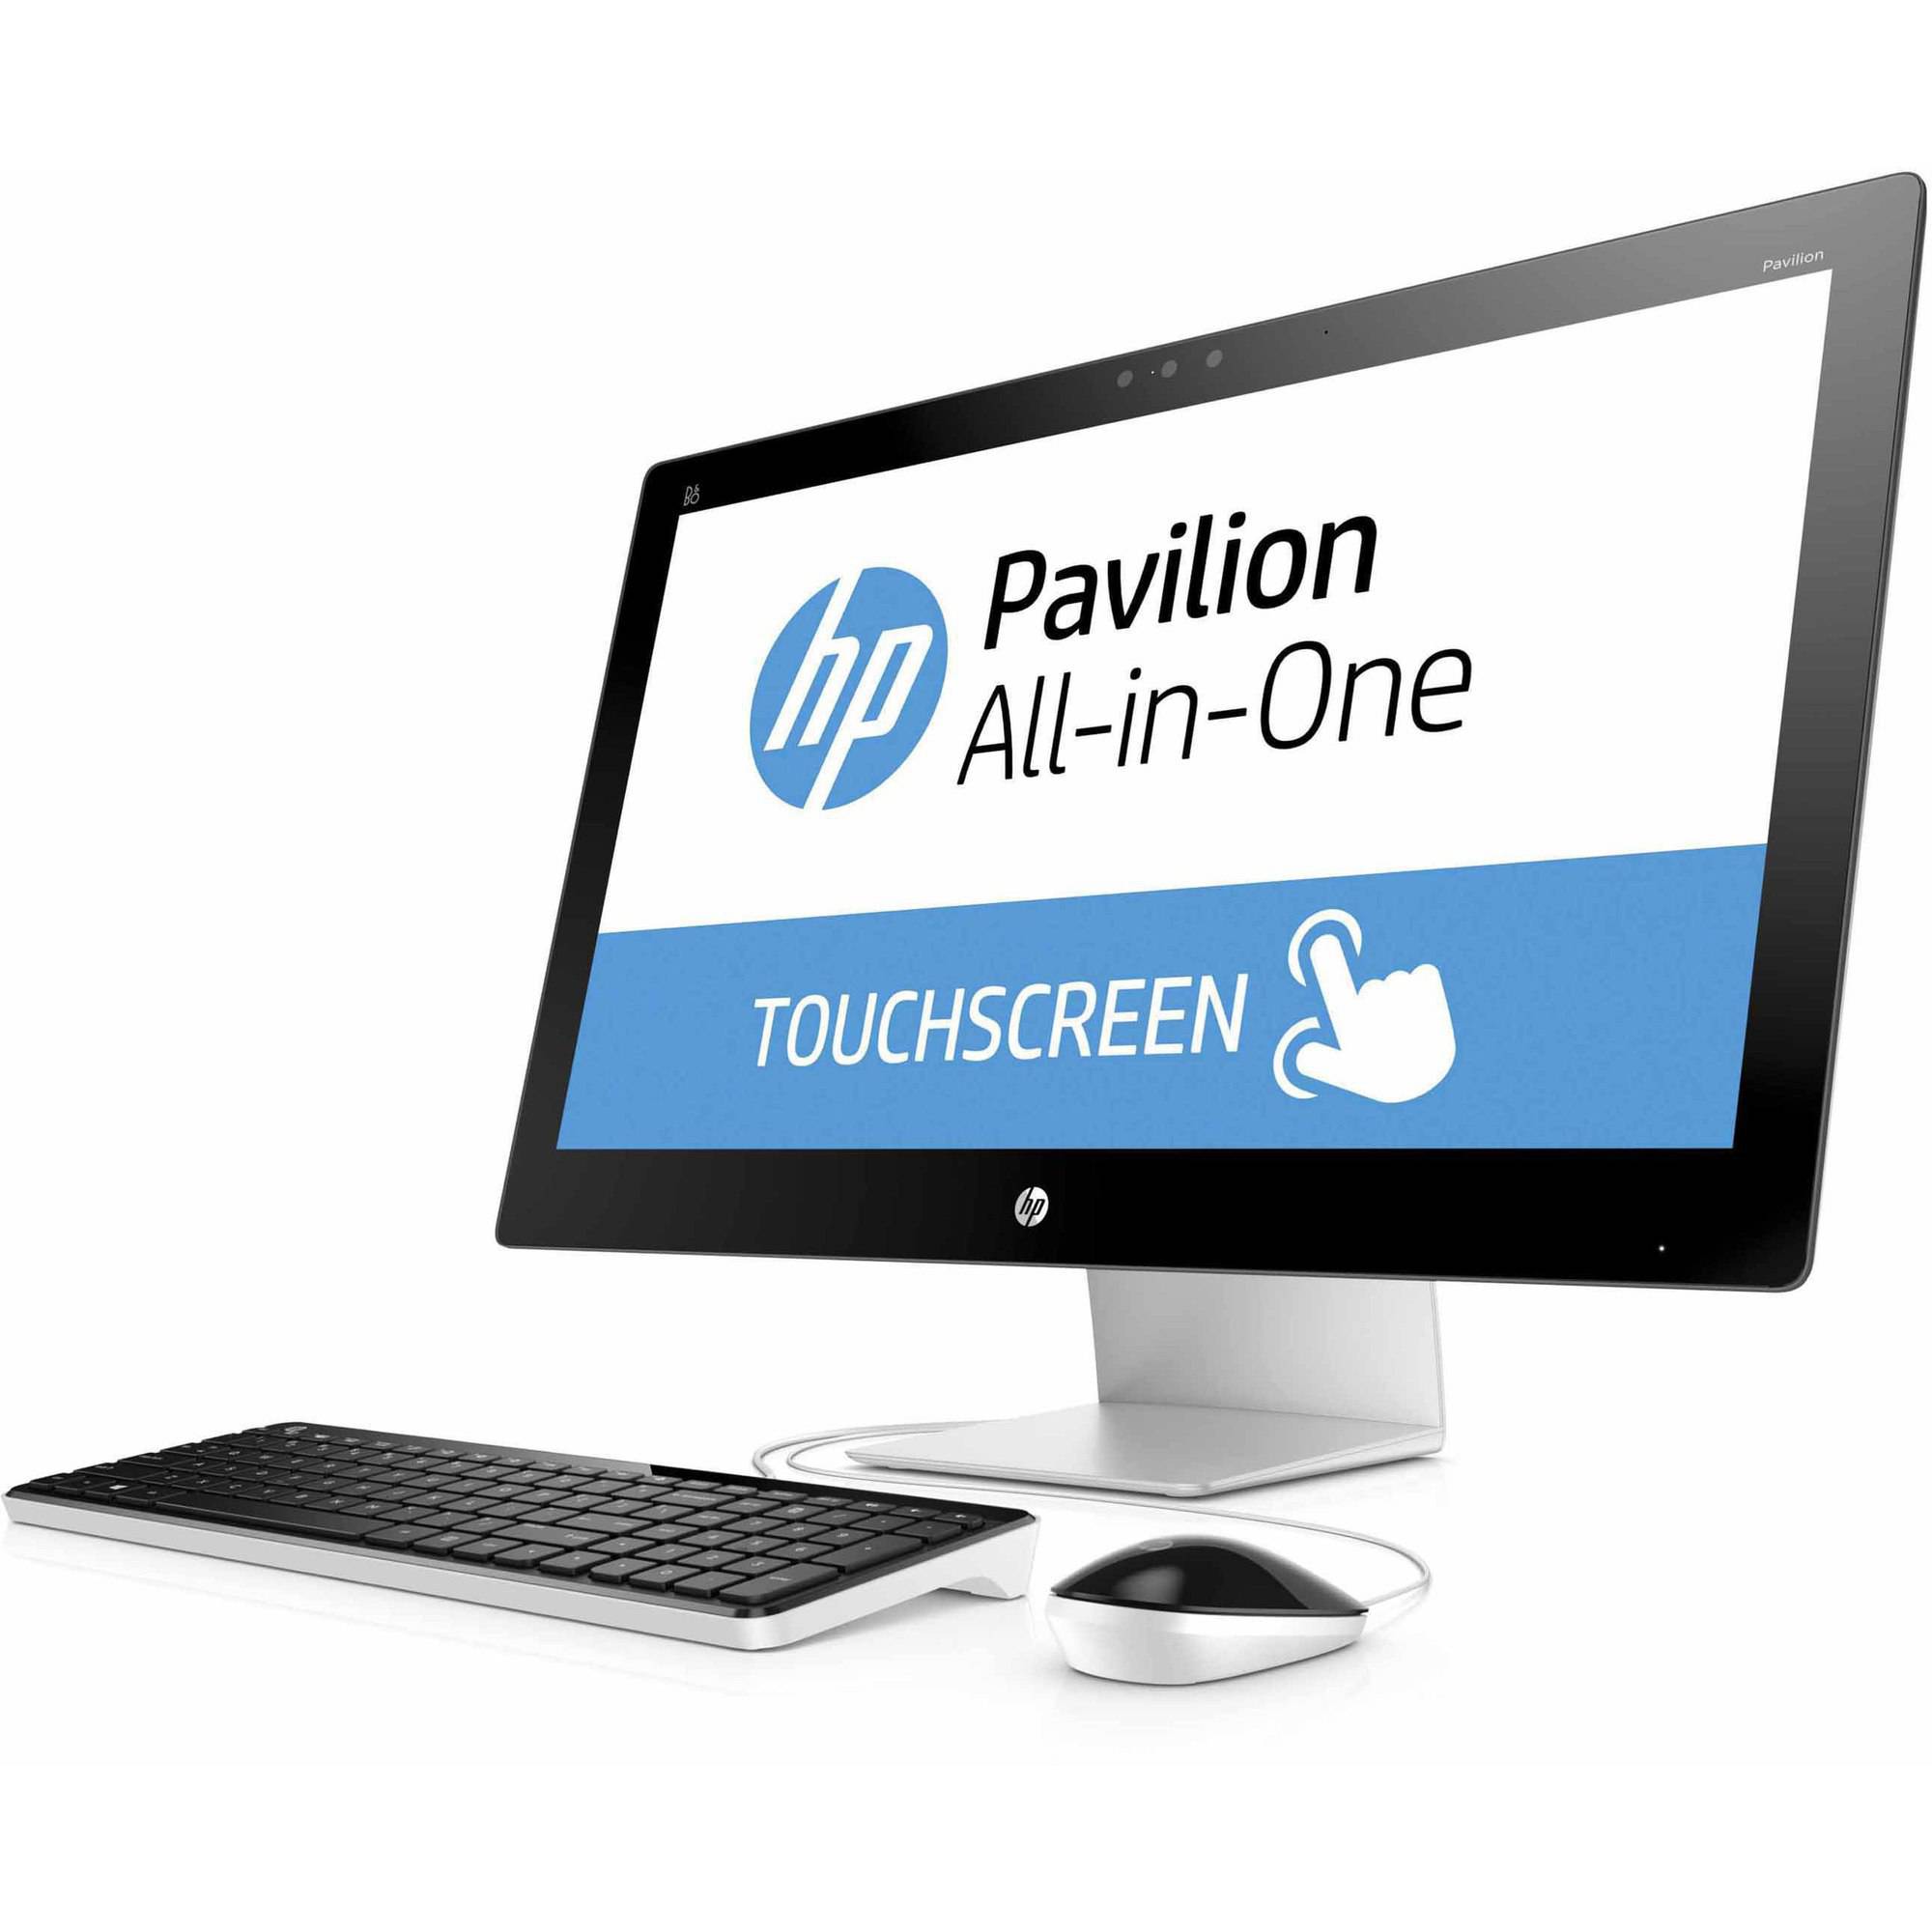 Restored HP 22-a113w Pavilion 21.5" FHD Touchscreen Pentium G3260T 2.9GHz 4GB RAM 1TB HDD Win 10 Home White (Refurbished) - image 3 of 4